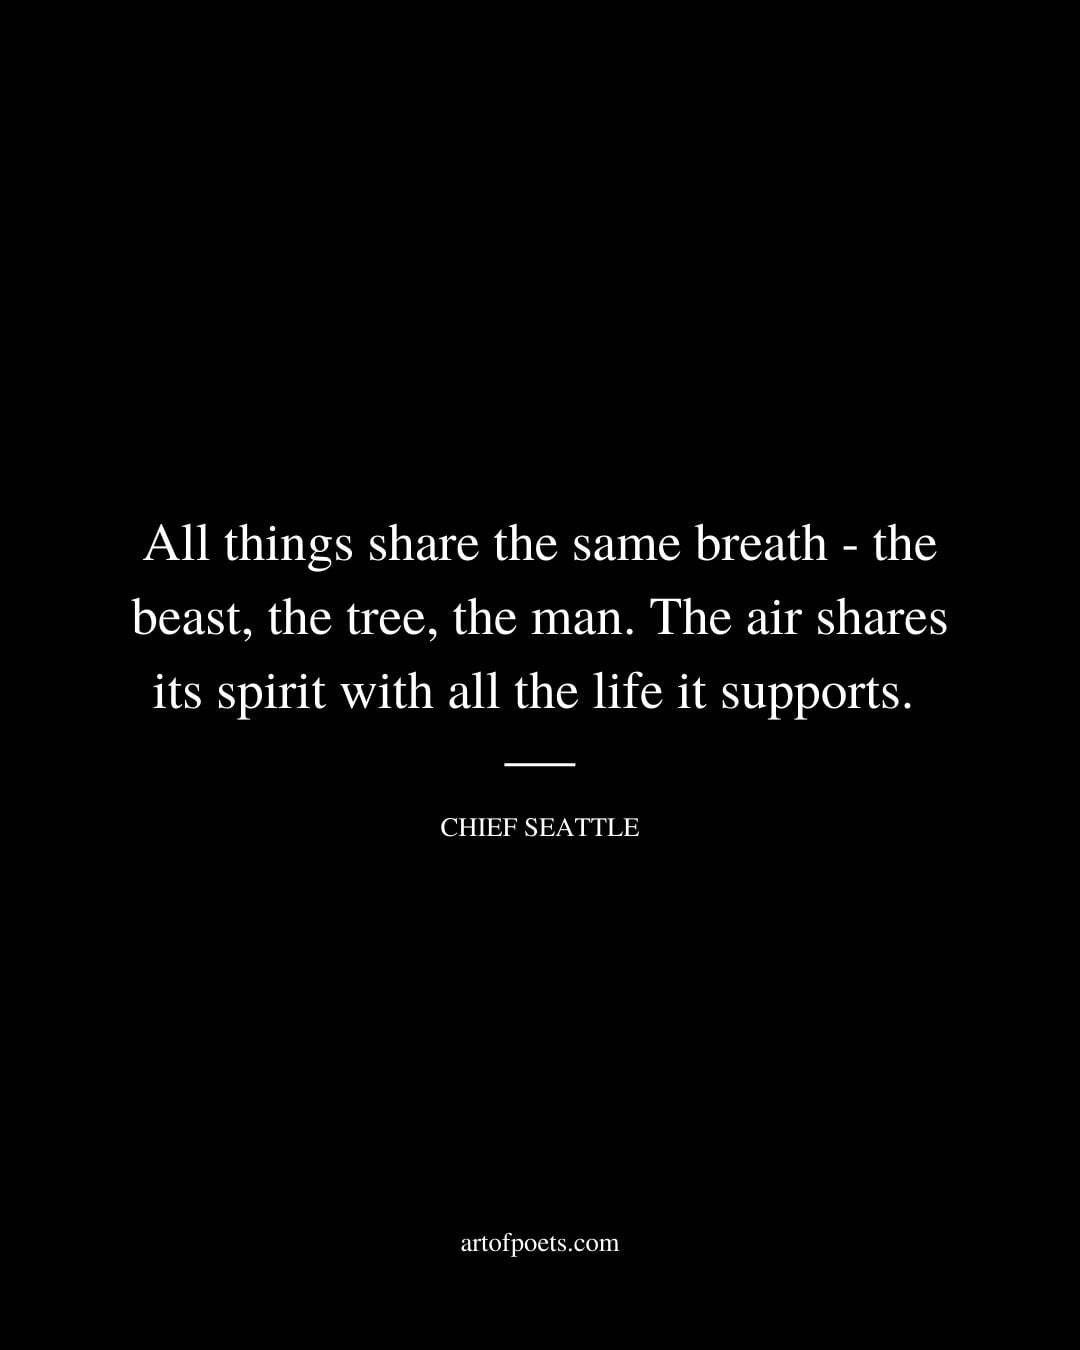 All things share the same breath the beast the tree the man. The air shares its spirit with all the life it supports. Chief Seattle